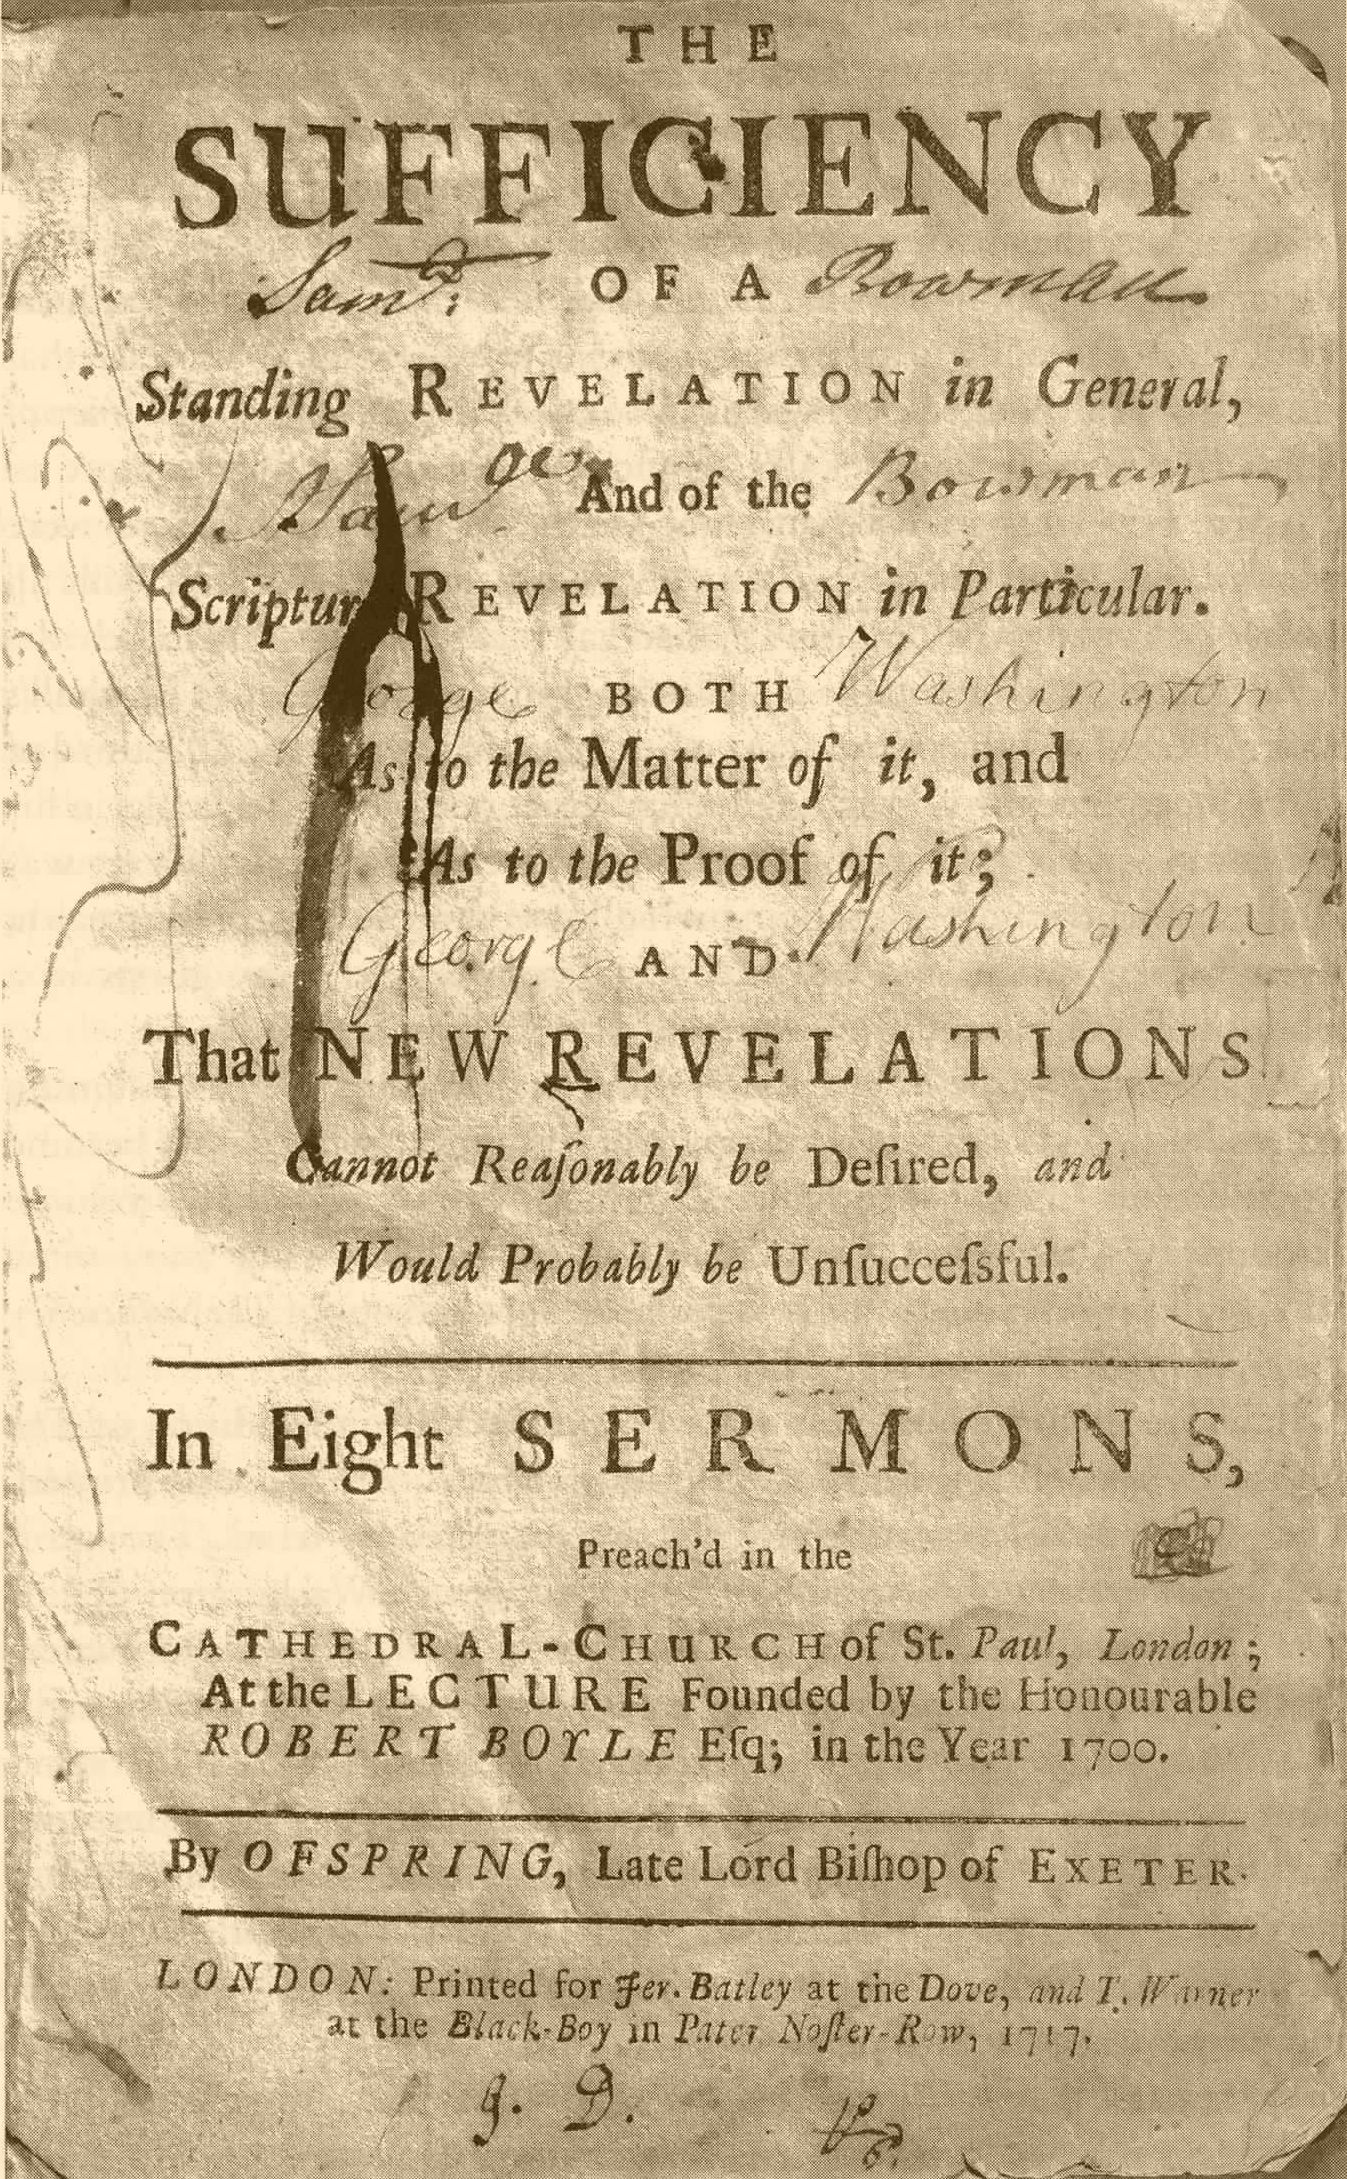 Washington inscribed his copy of Bishop Offspring's Sufficiency of Revelation when he was 11 years old.